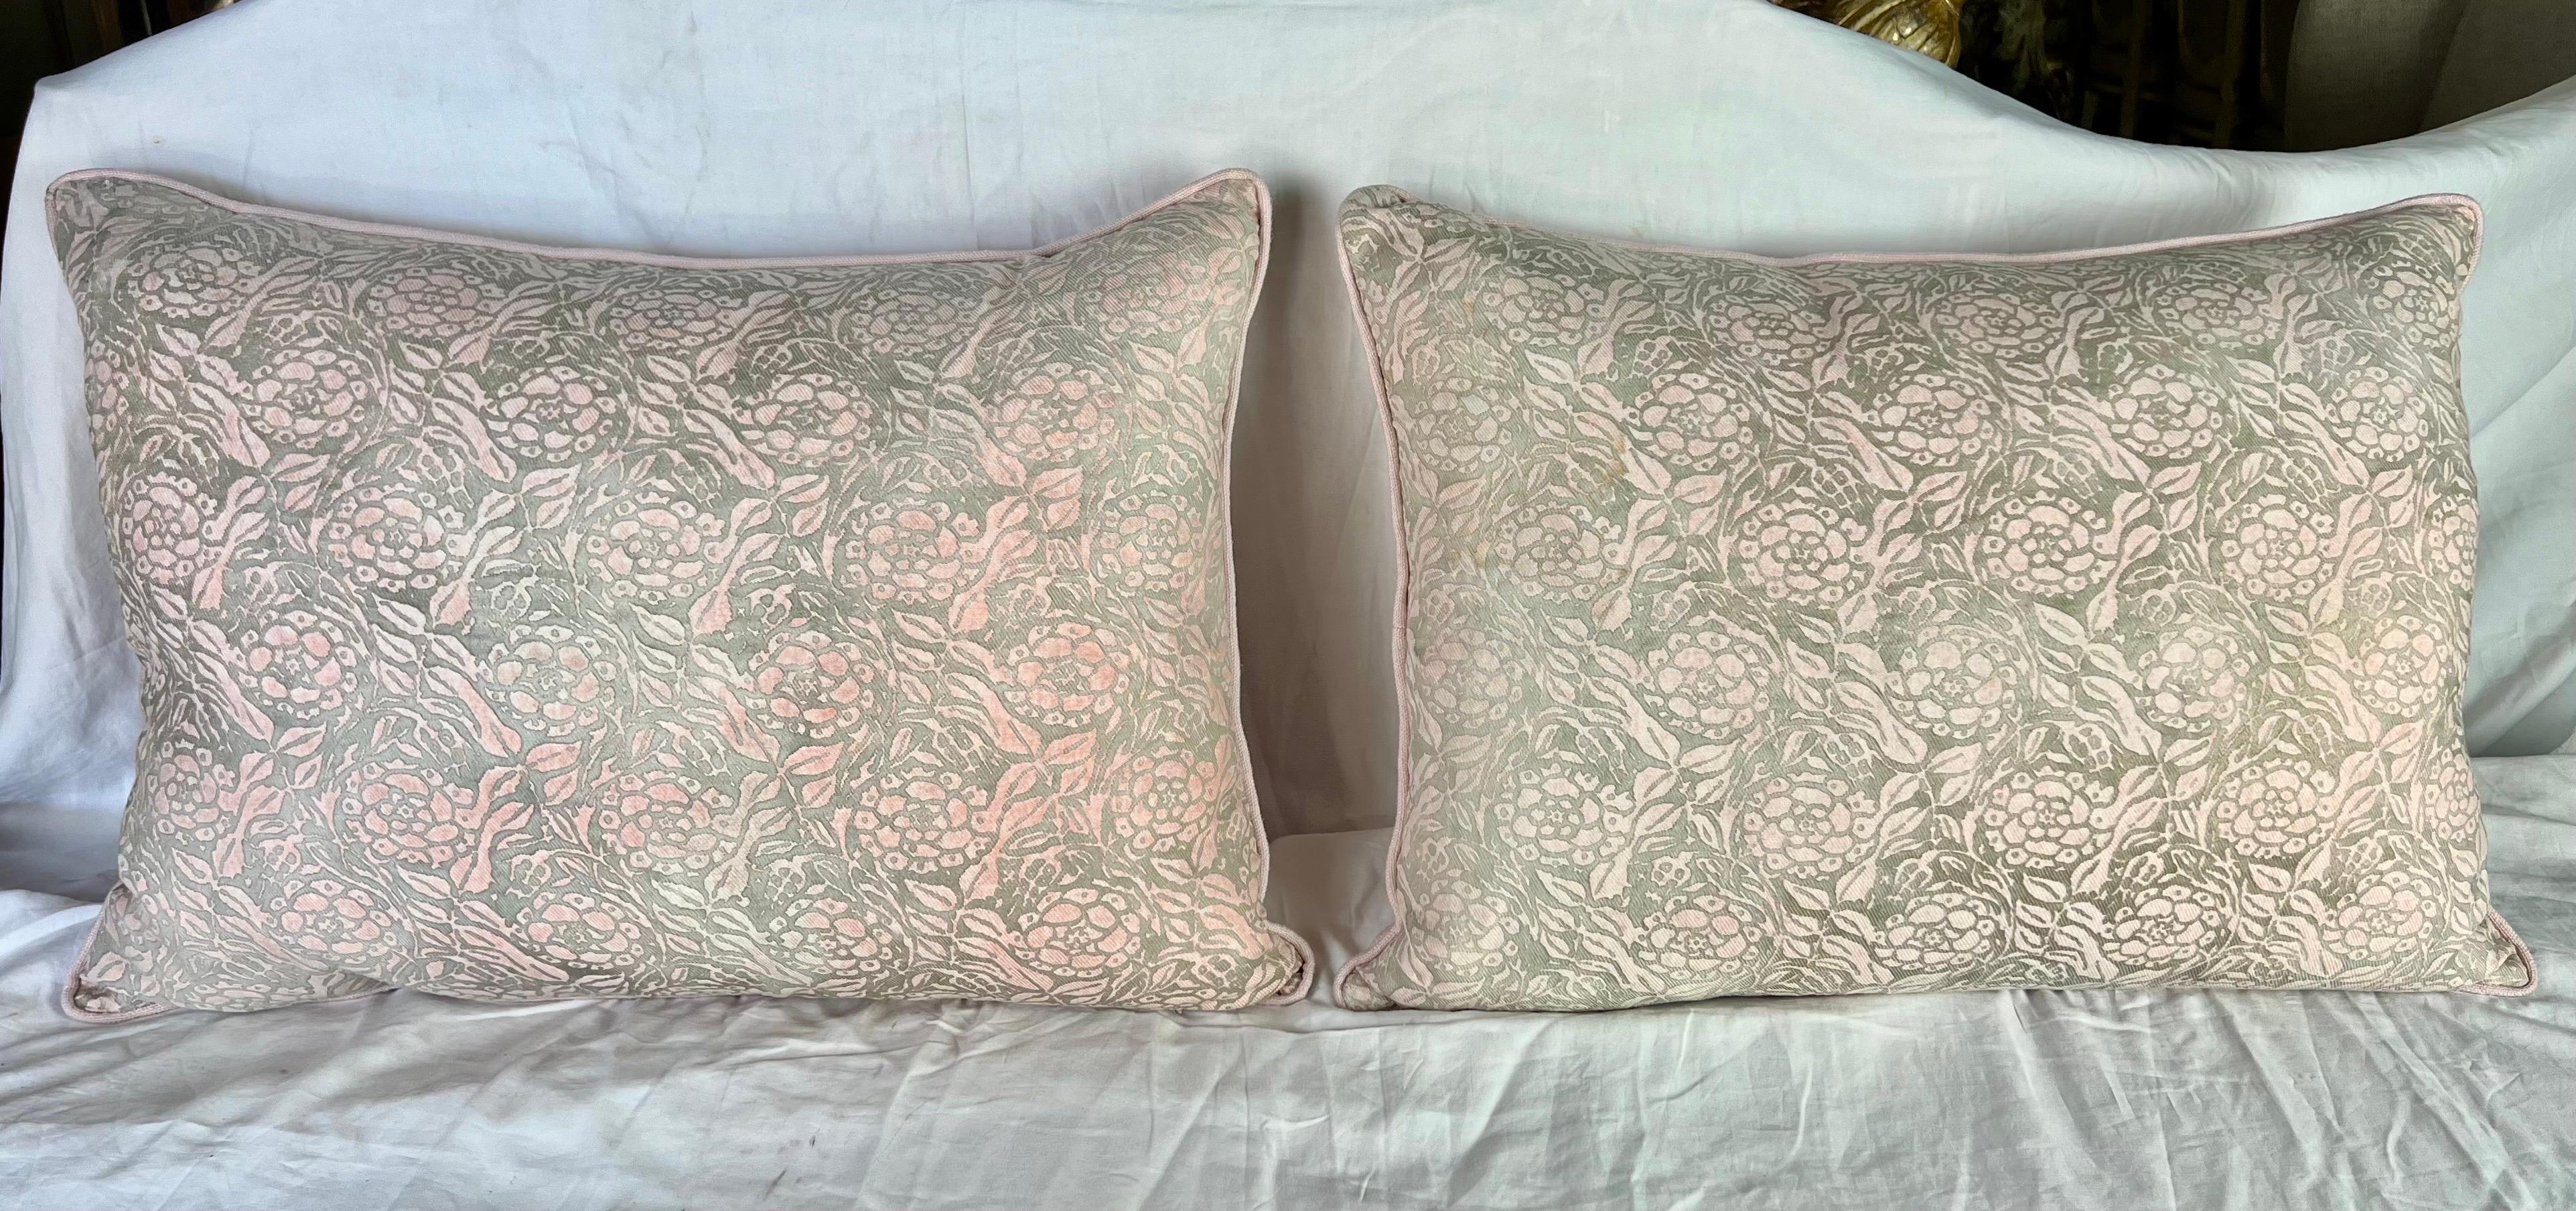 An exquisite pair of mid-20th-century Fortuny textile pillows in pink and gold, complemented by petal pink linen backs, designed by the talented Mariano Fortuny.